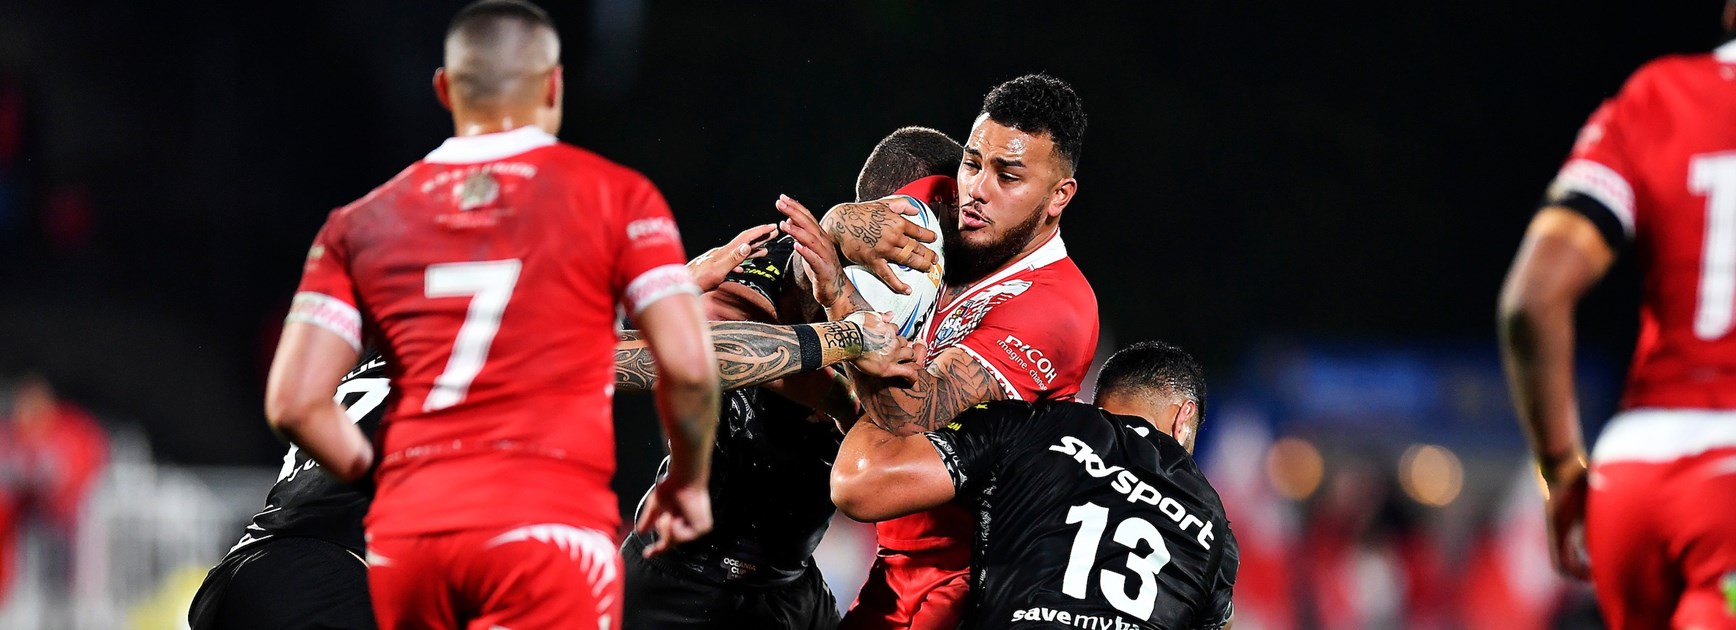 New Zealand v Mate Ma'a Tonga: Manu to fullback; Staggs in halves